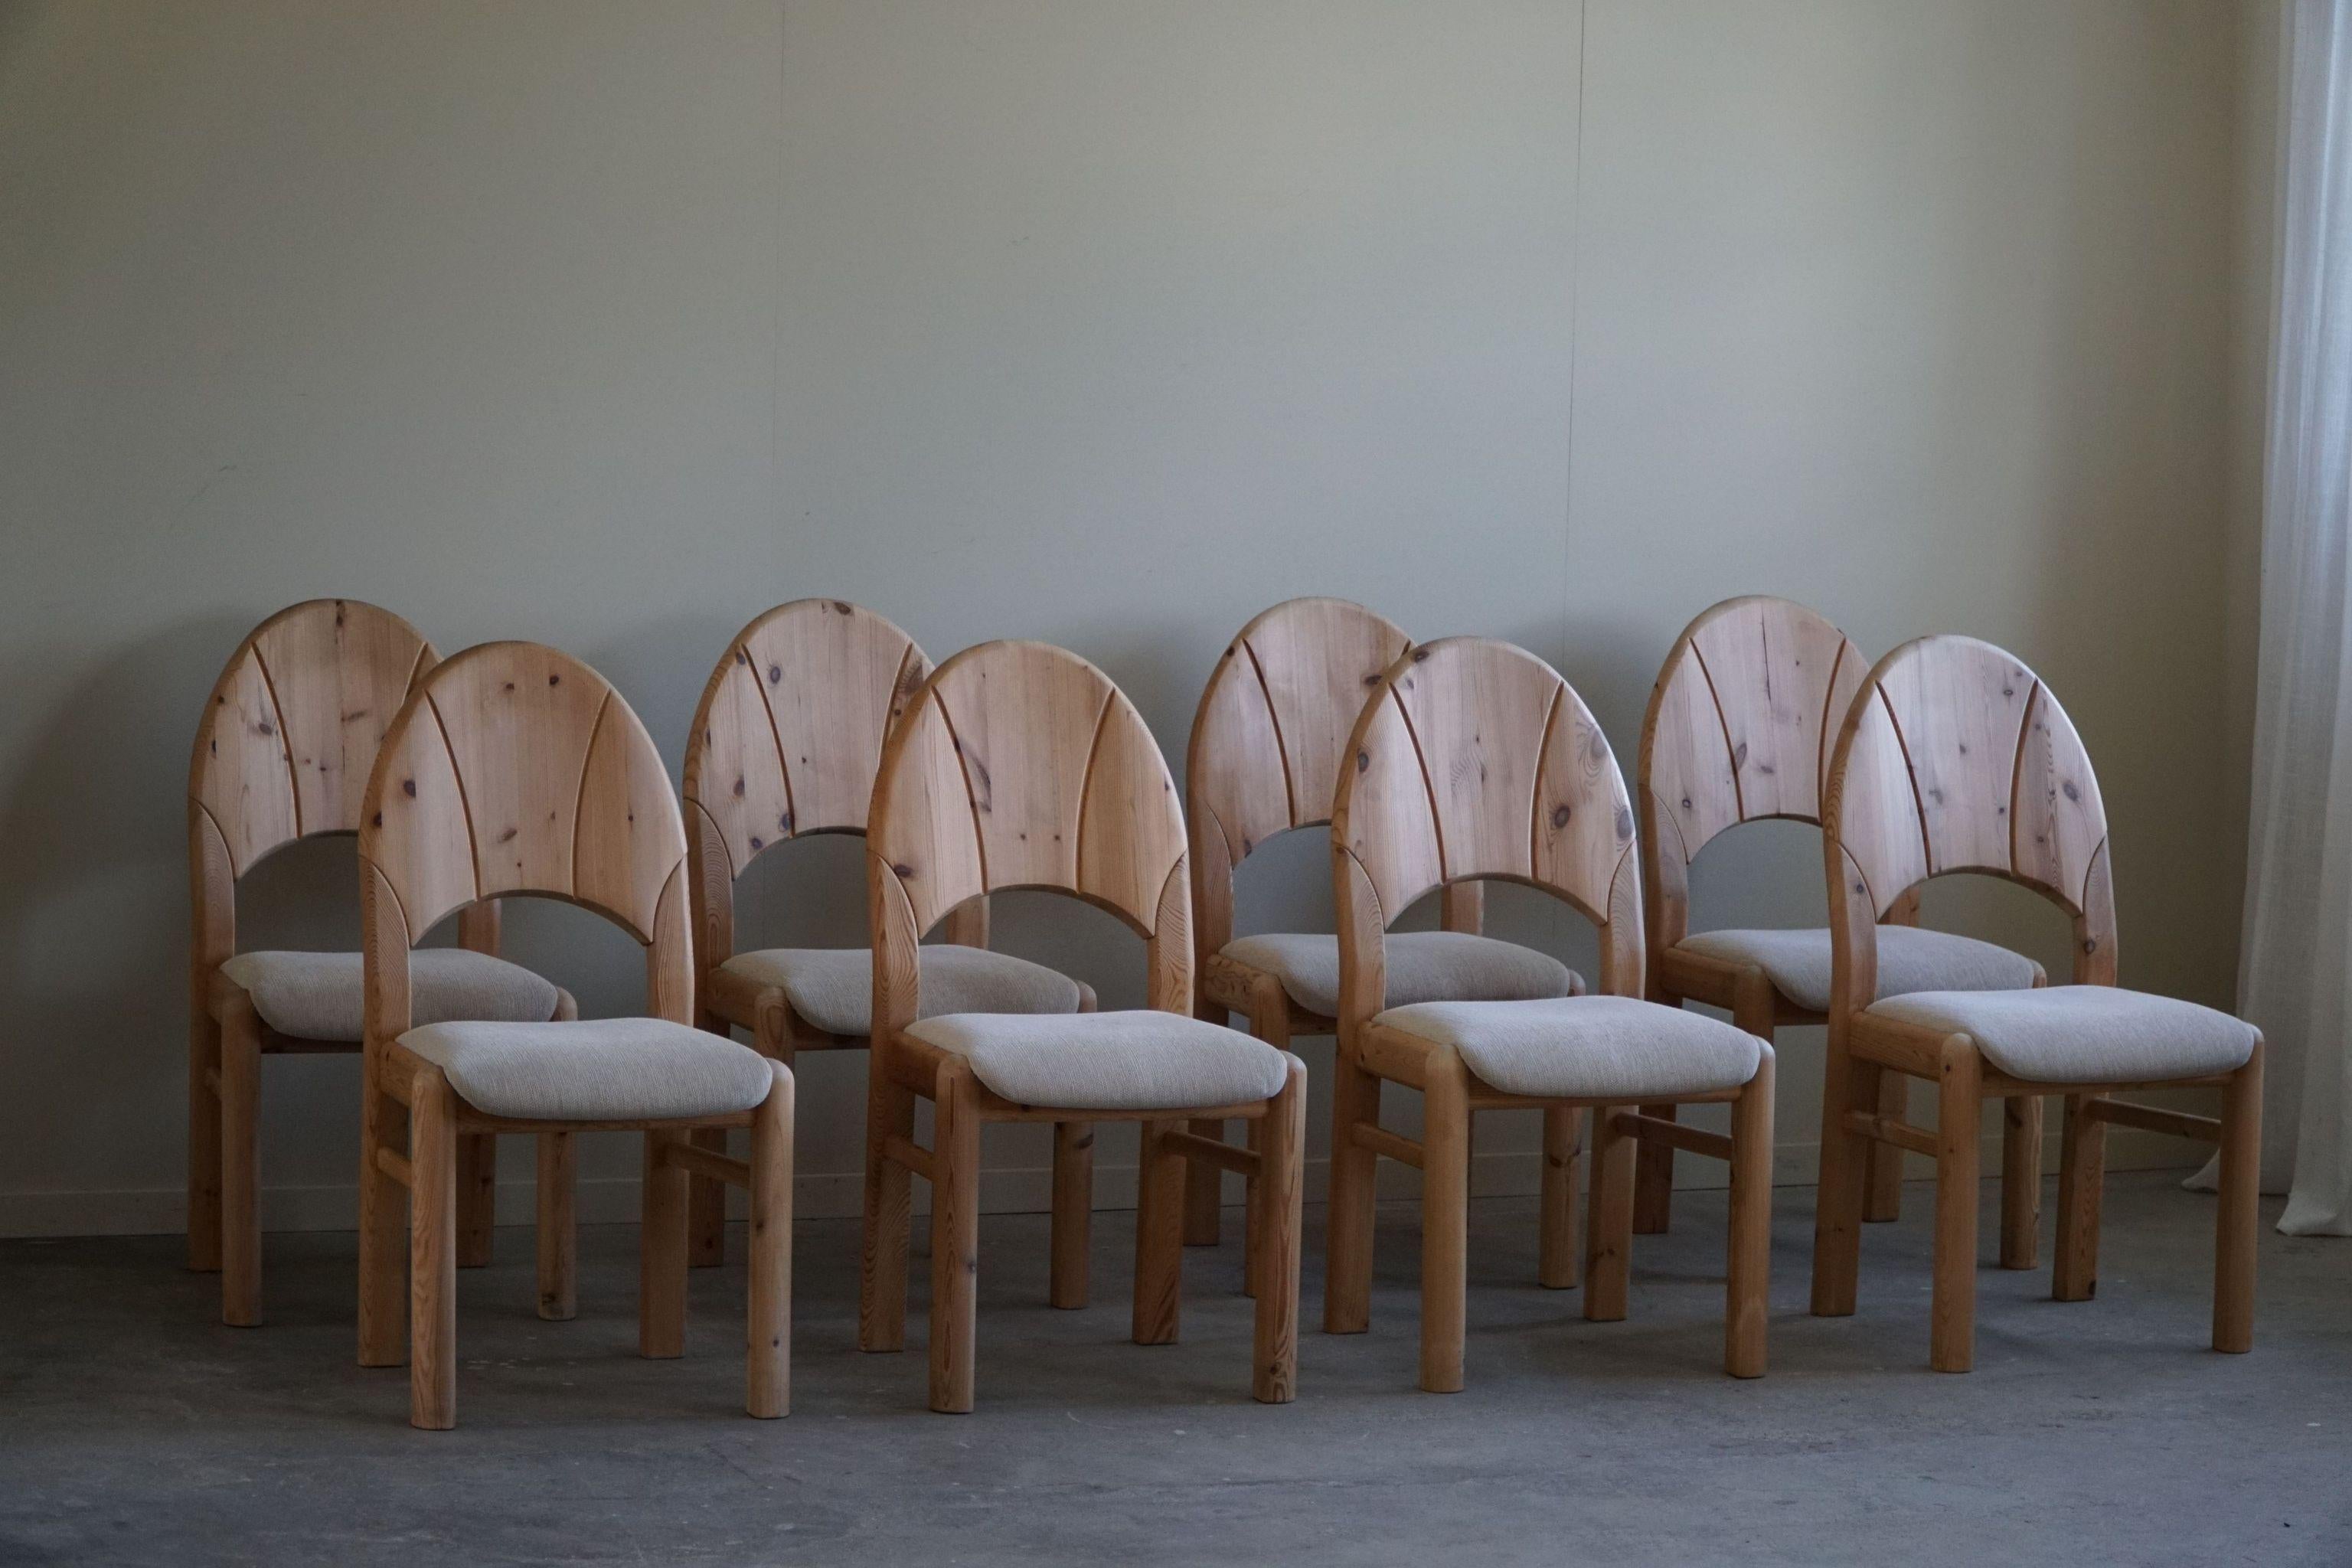 Set of 8 Sculptural Danish Modern Brutalist Chairs in Pine & Wool, 1970s In Good Condition For Sale In Odense, DK